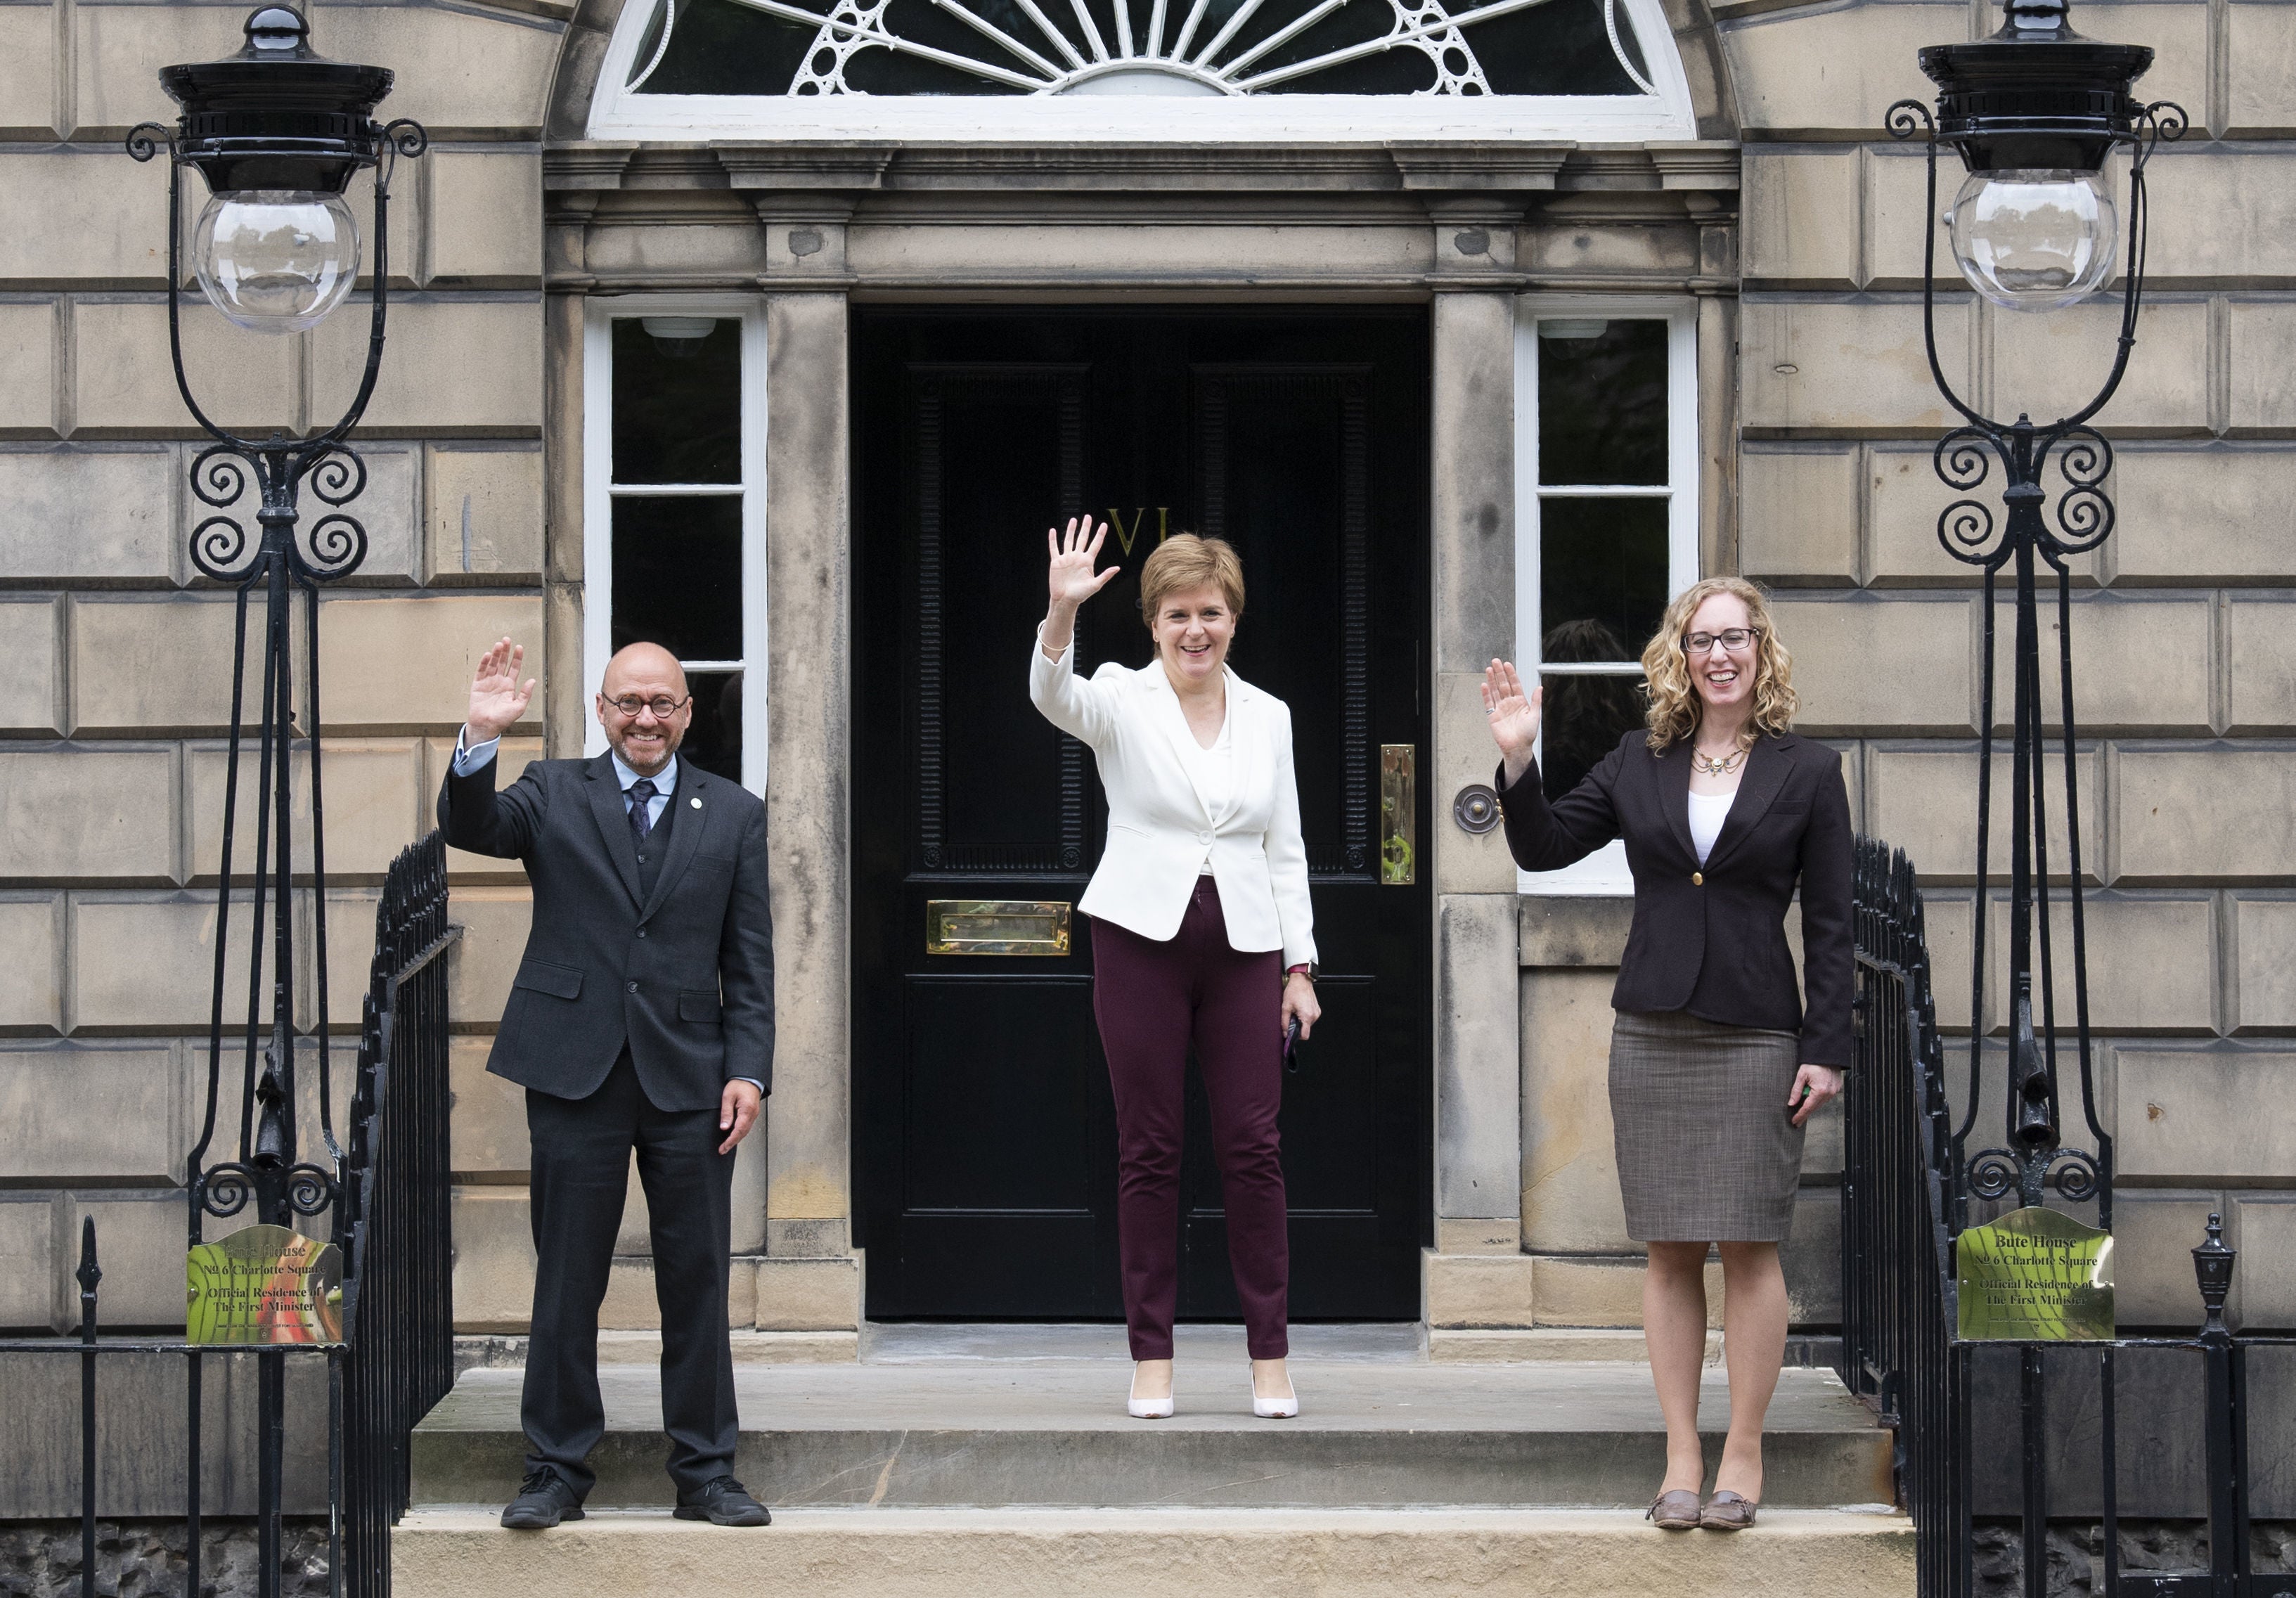 Nicola Sturgeon (centre) brought Scottish Green co-leaders Patrick Harvie (left) and Lorna Slater (right) into Government after signing a cooperation agreement with their party. (Lesley Martin/PA)